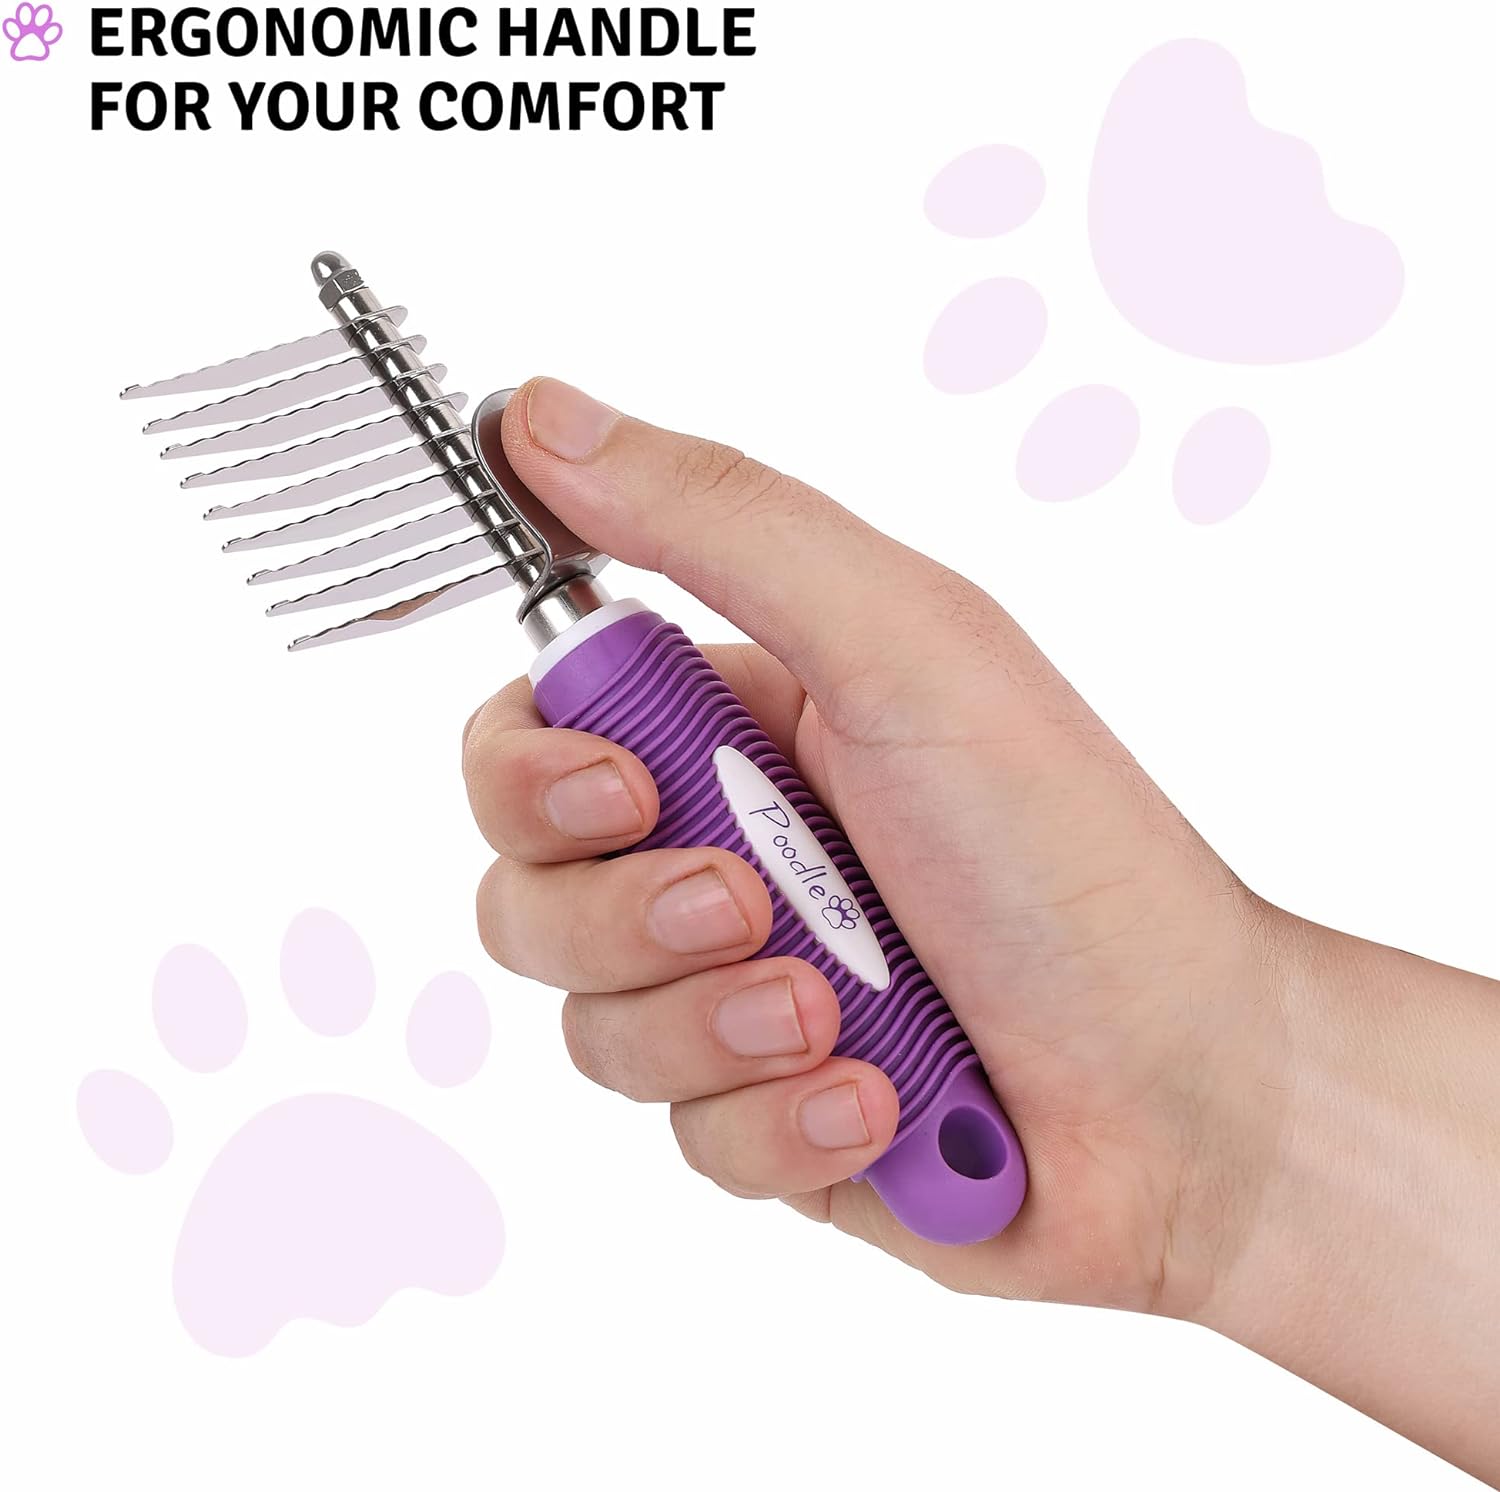 Poodle Pet Dematting Fur Rake Comb Brush Tool - Dog and Cat Comb with Long 2.5 Inches Steel Safety Blades for Detangling Matted or Knotted Undercoat Hair